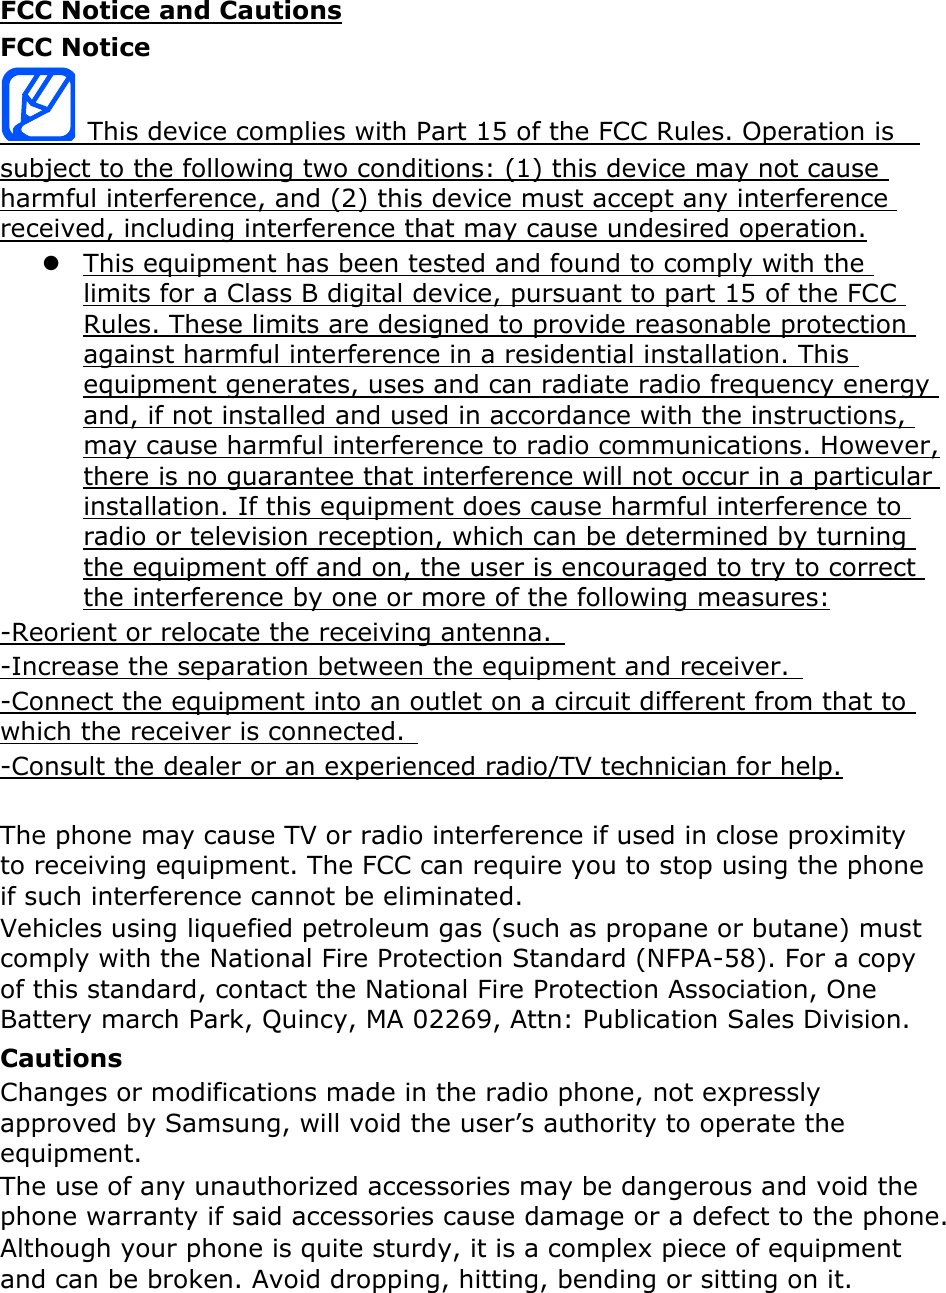 Page 17 of Samsung Electronics Co SCHI405U Portable Handset with Multi-band CDMA/LTE, WLAN and Bluetooth User Manual